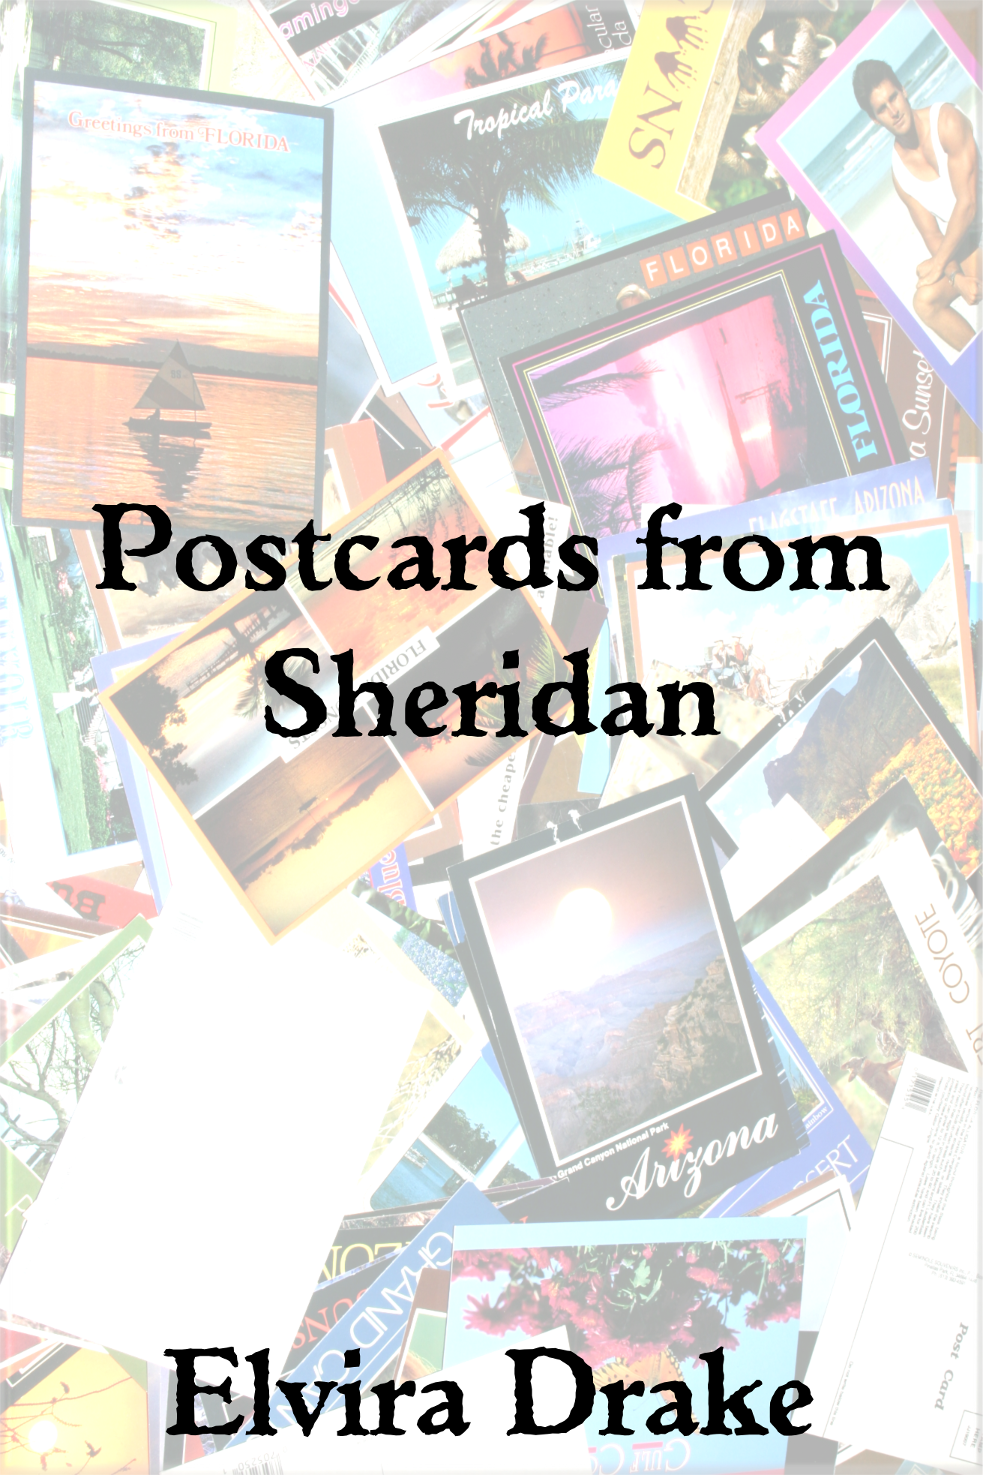 POSTCARDS FROM SHERIDAN